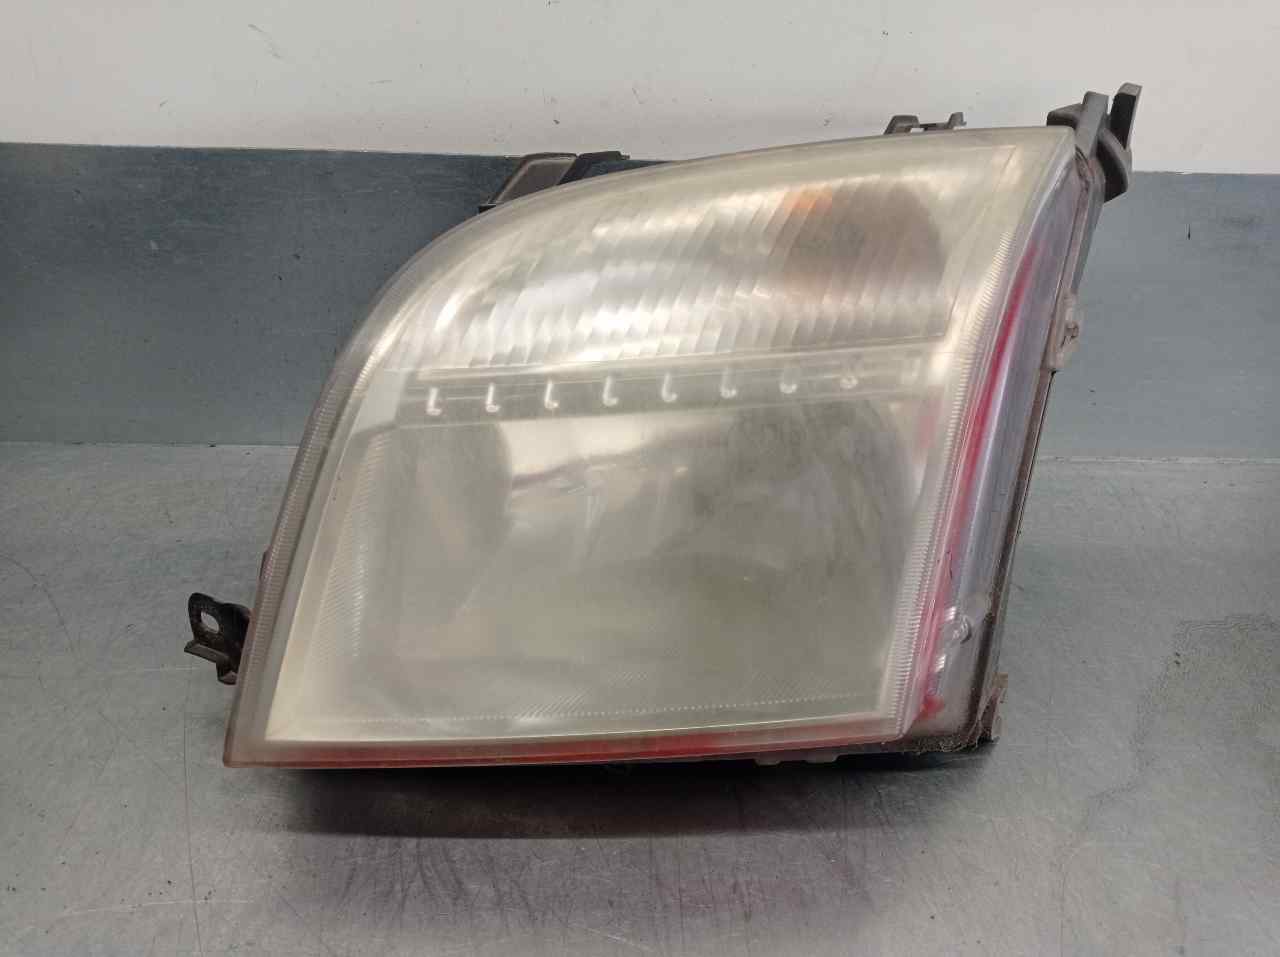 FORD Fusion 1 generation (2002-2012) Front Left Headlight 1526786, 5PUERTAS 19820669